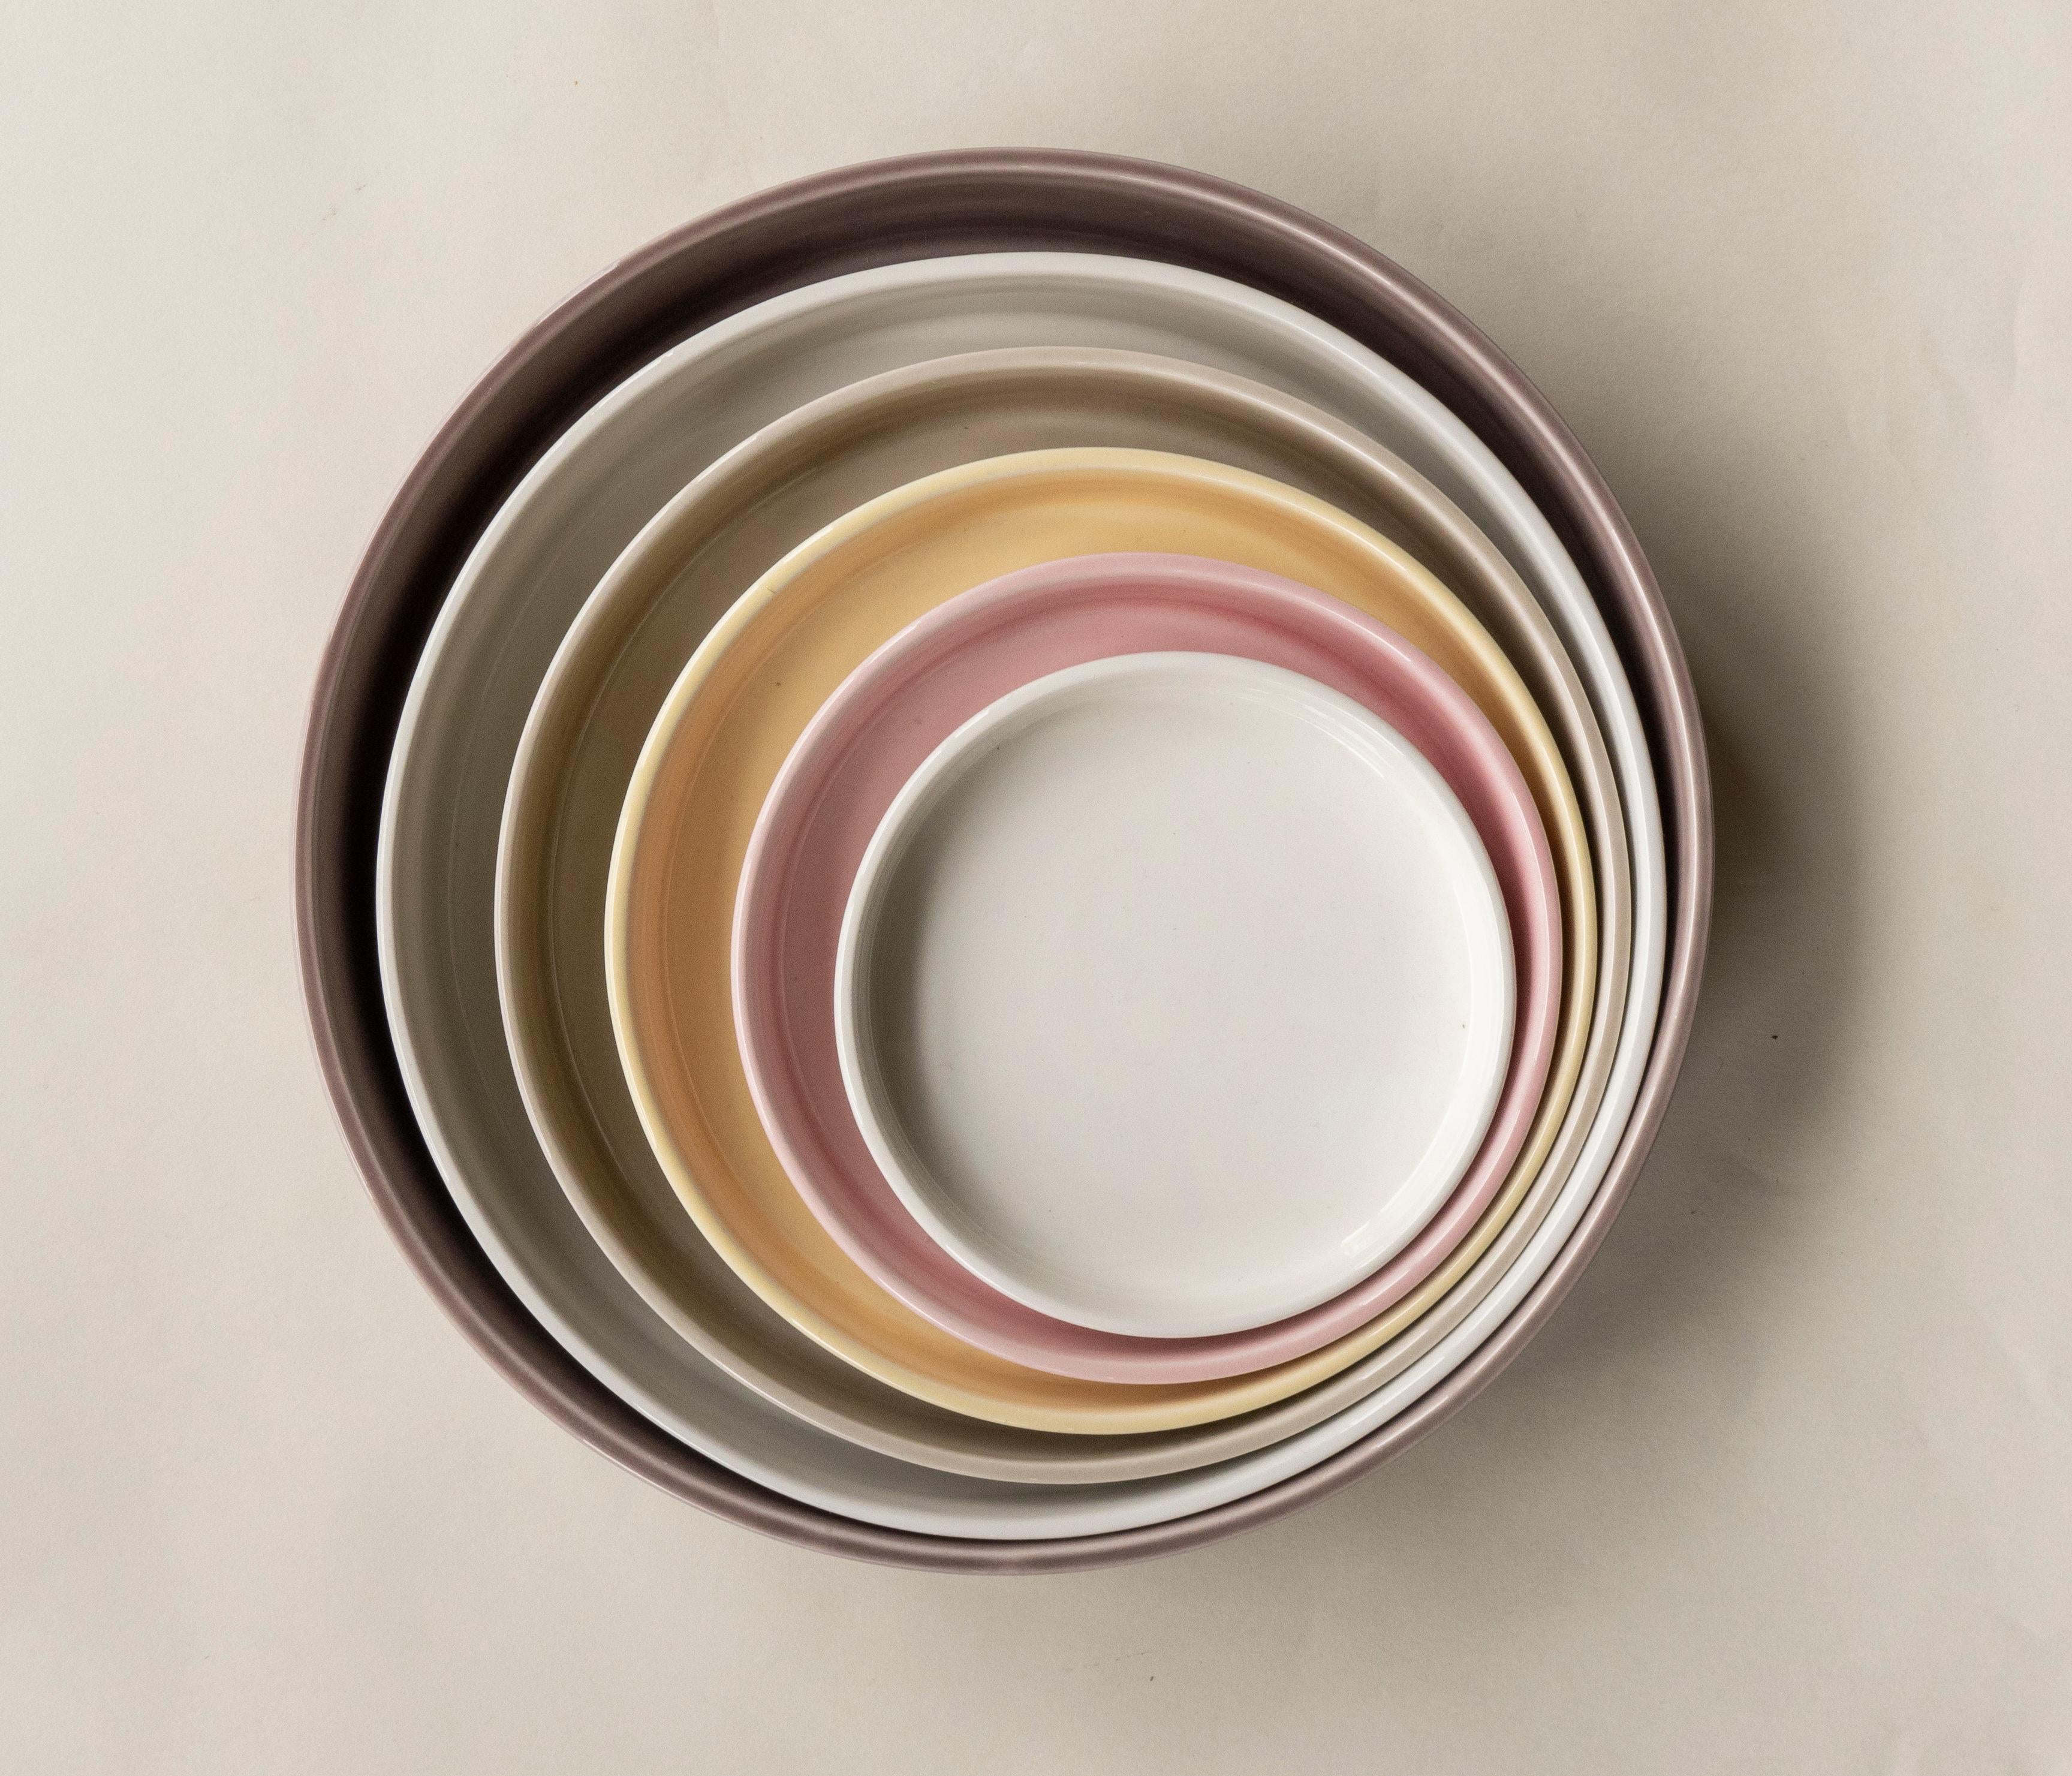 Italian 21st Century Ceramic Set of 6 Concentric Serving Round Dishes Made in Italy For Sale